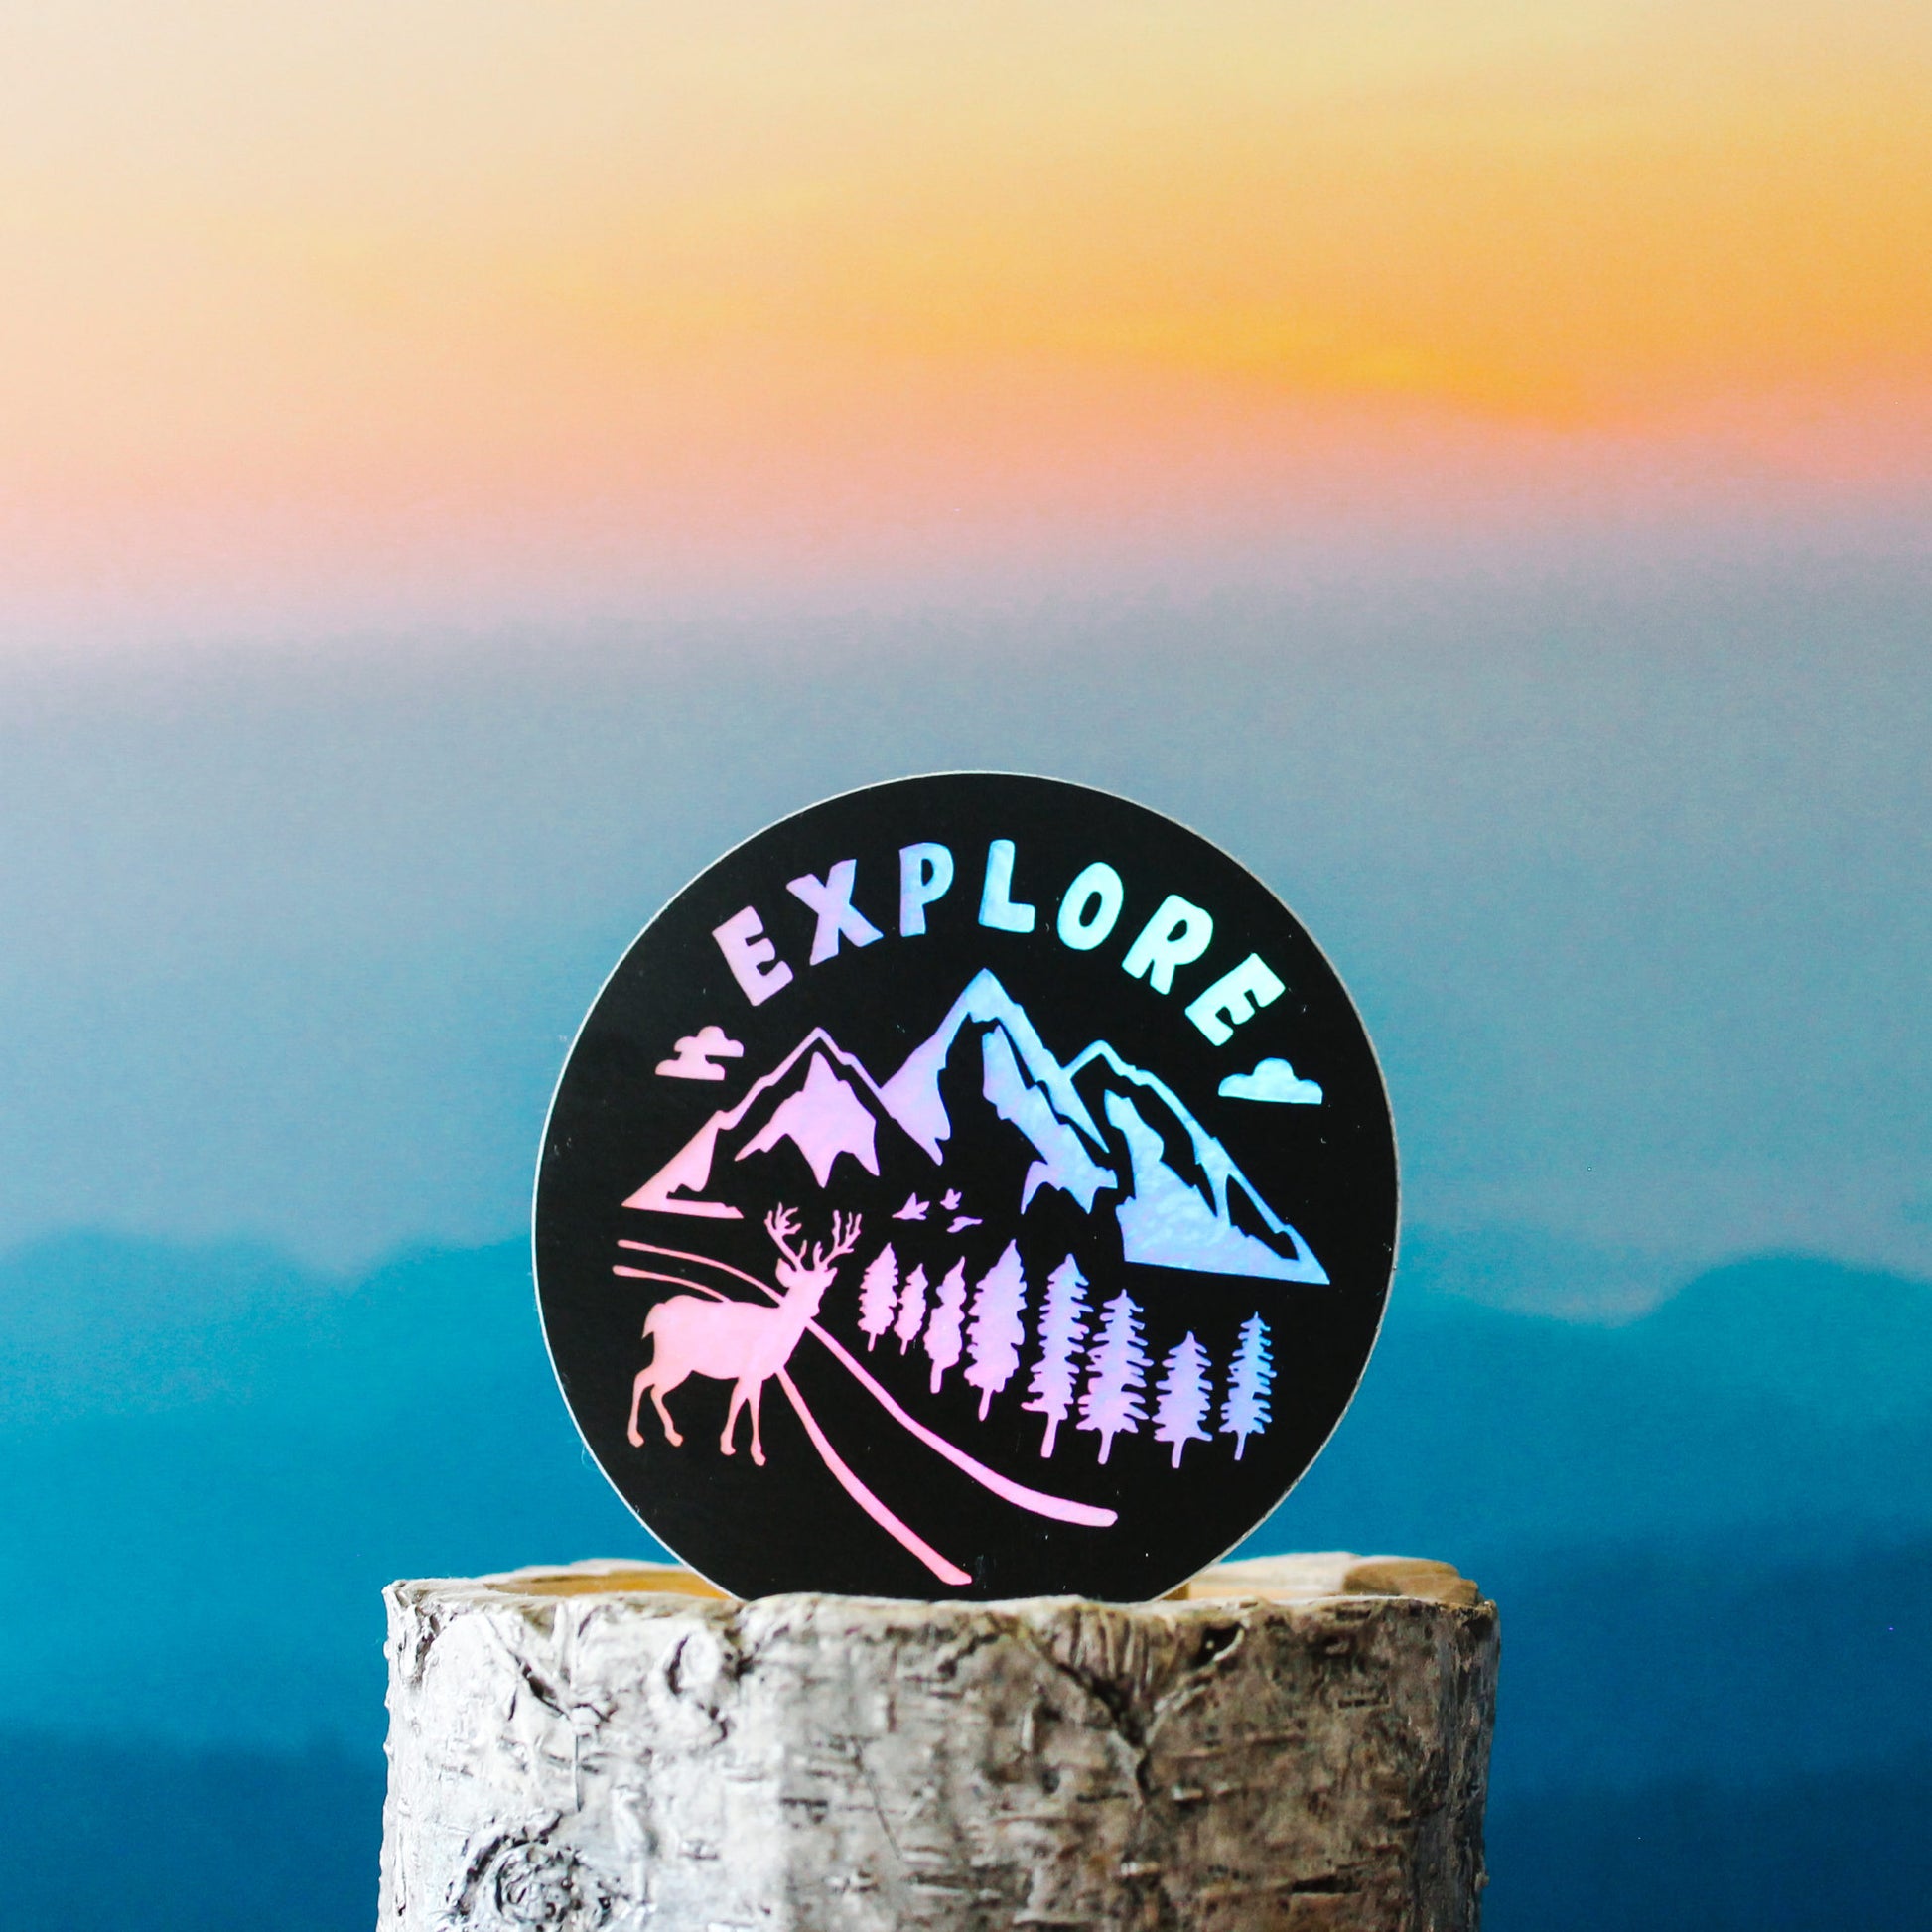 black and rainbow holographic sticker with outdoors and forest scenery with text "explore"